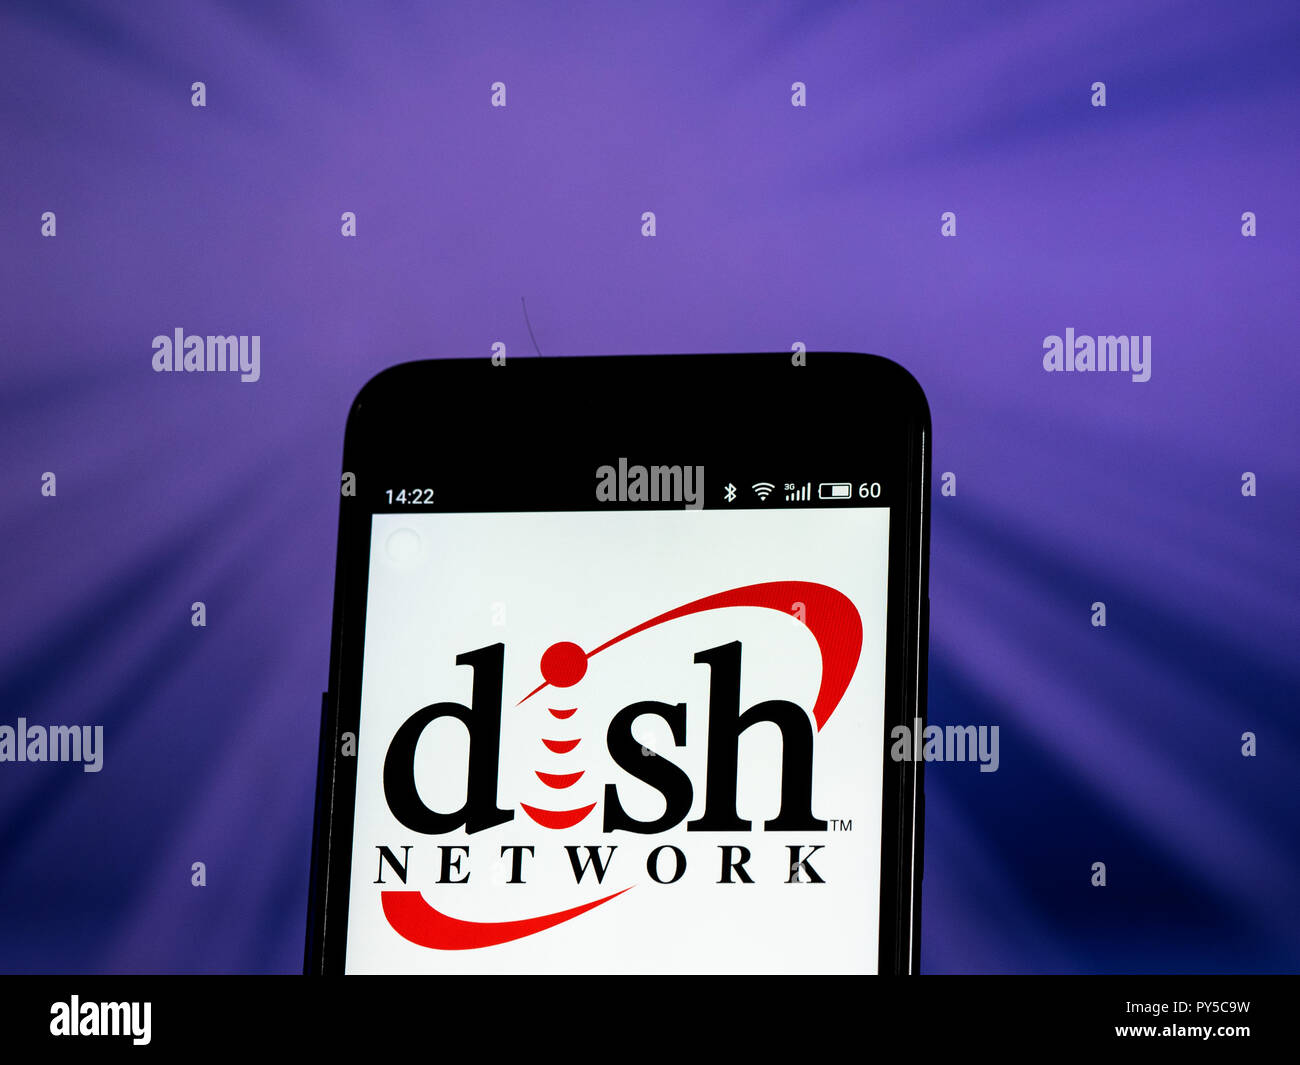 Dish Network Satellite television company logo seen displayed on smart phone. Dish Network Corporation is a U.S. television provider. t is the owner of the direct-broadcast satellite provider Dish, and the over-the-top IPTV service Sling TV. As of November 2016, the company provided services to 13.7 million television and 580,000 broadband subscribers. Stock Photo